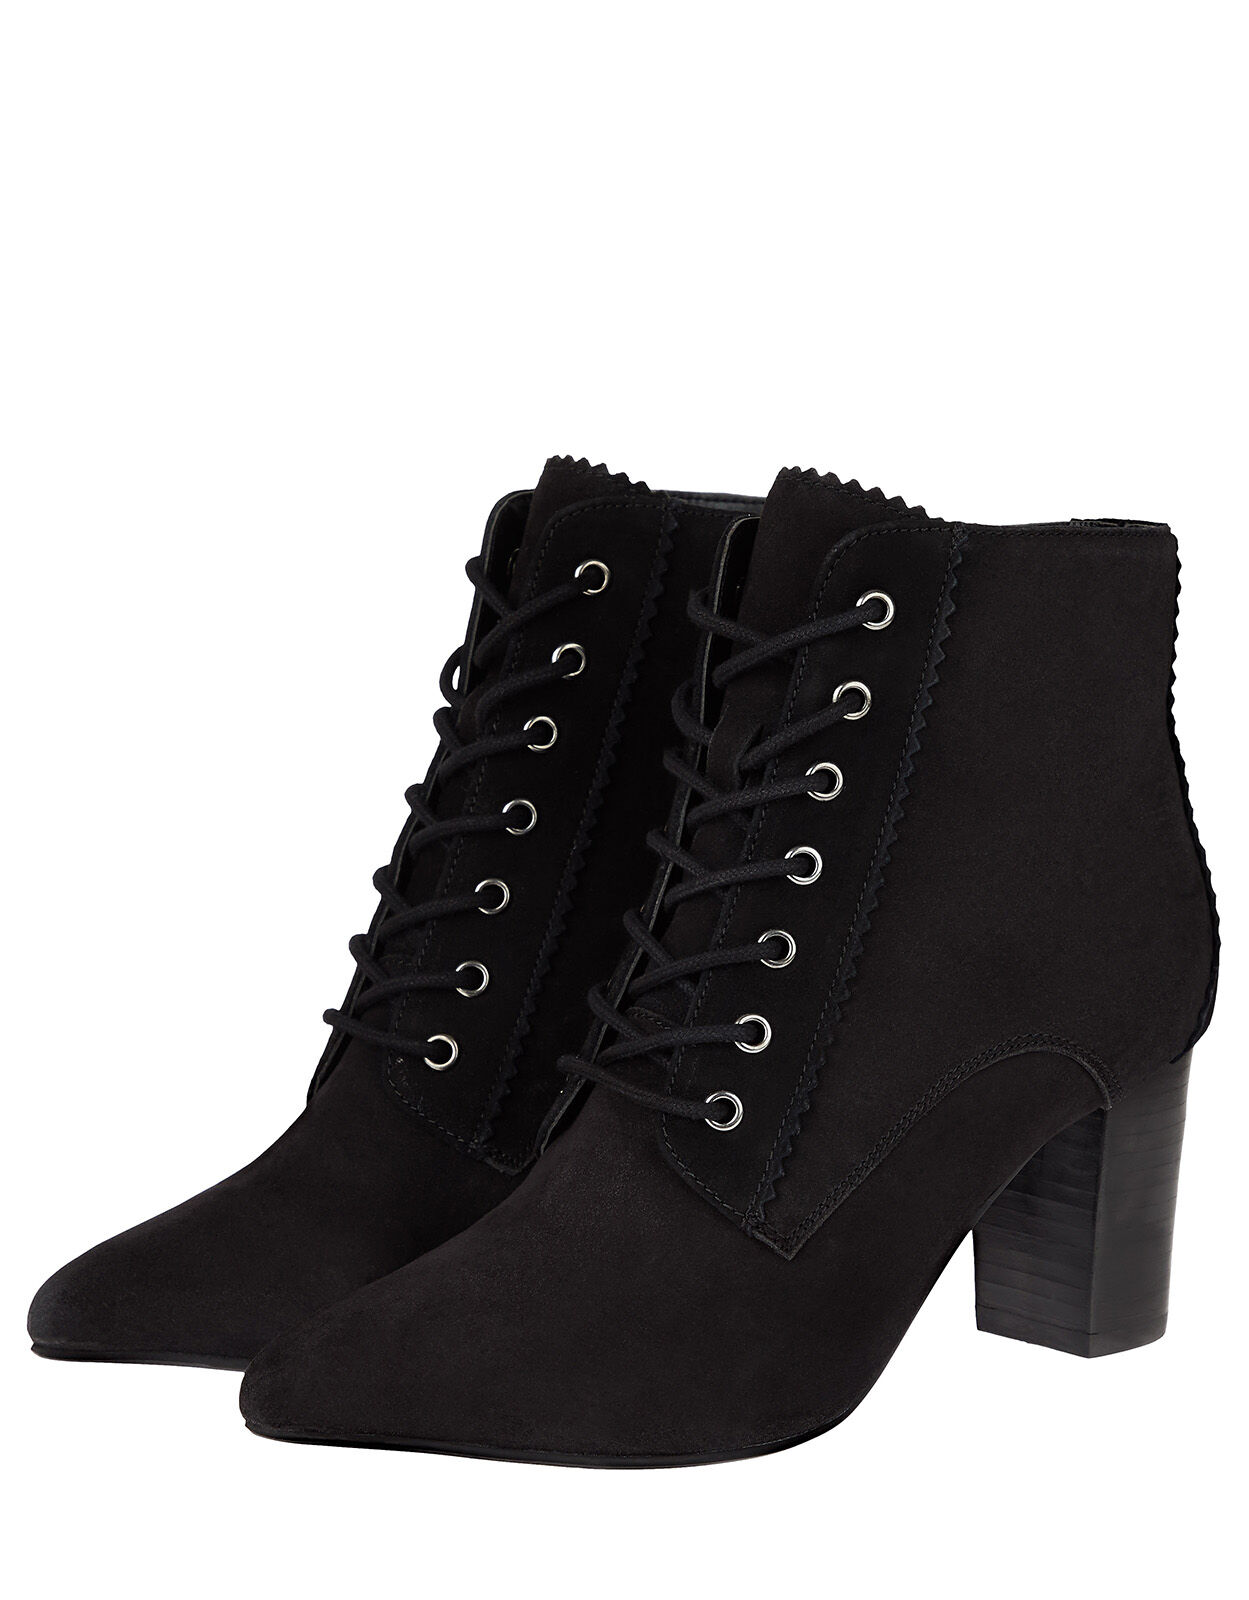 lace up heeled ankle boots uk